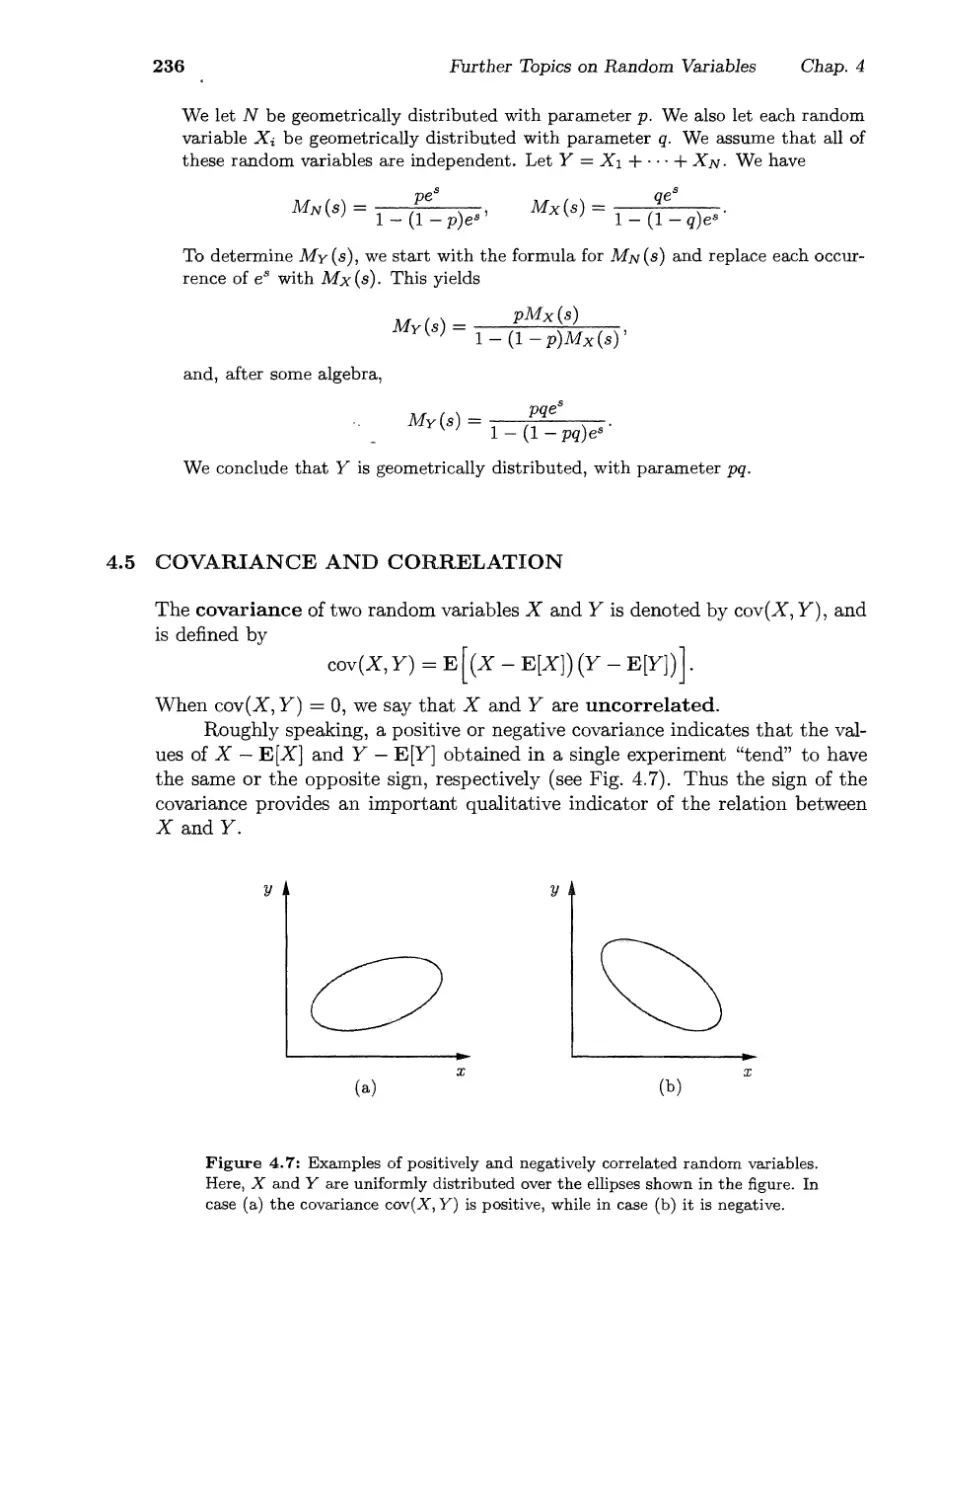 4.5 Covariance and Correlation